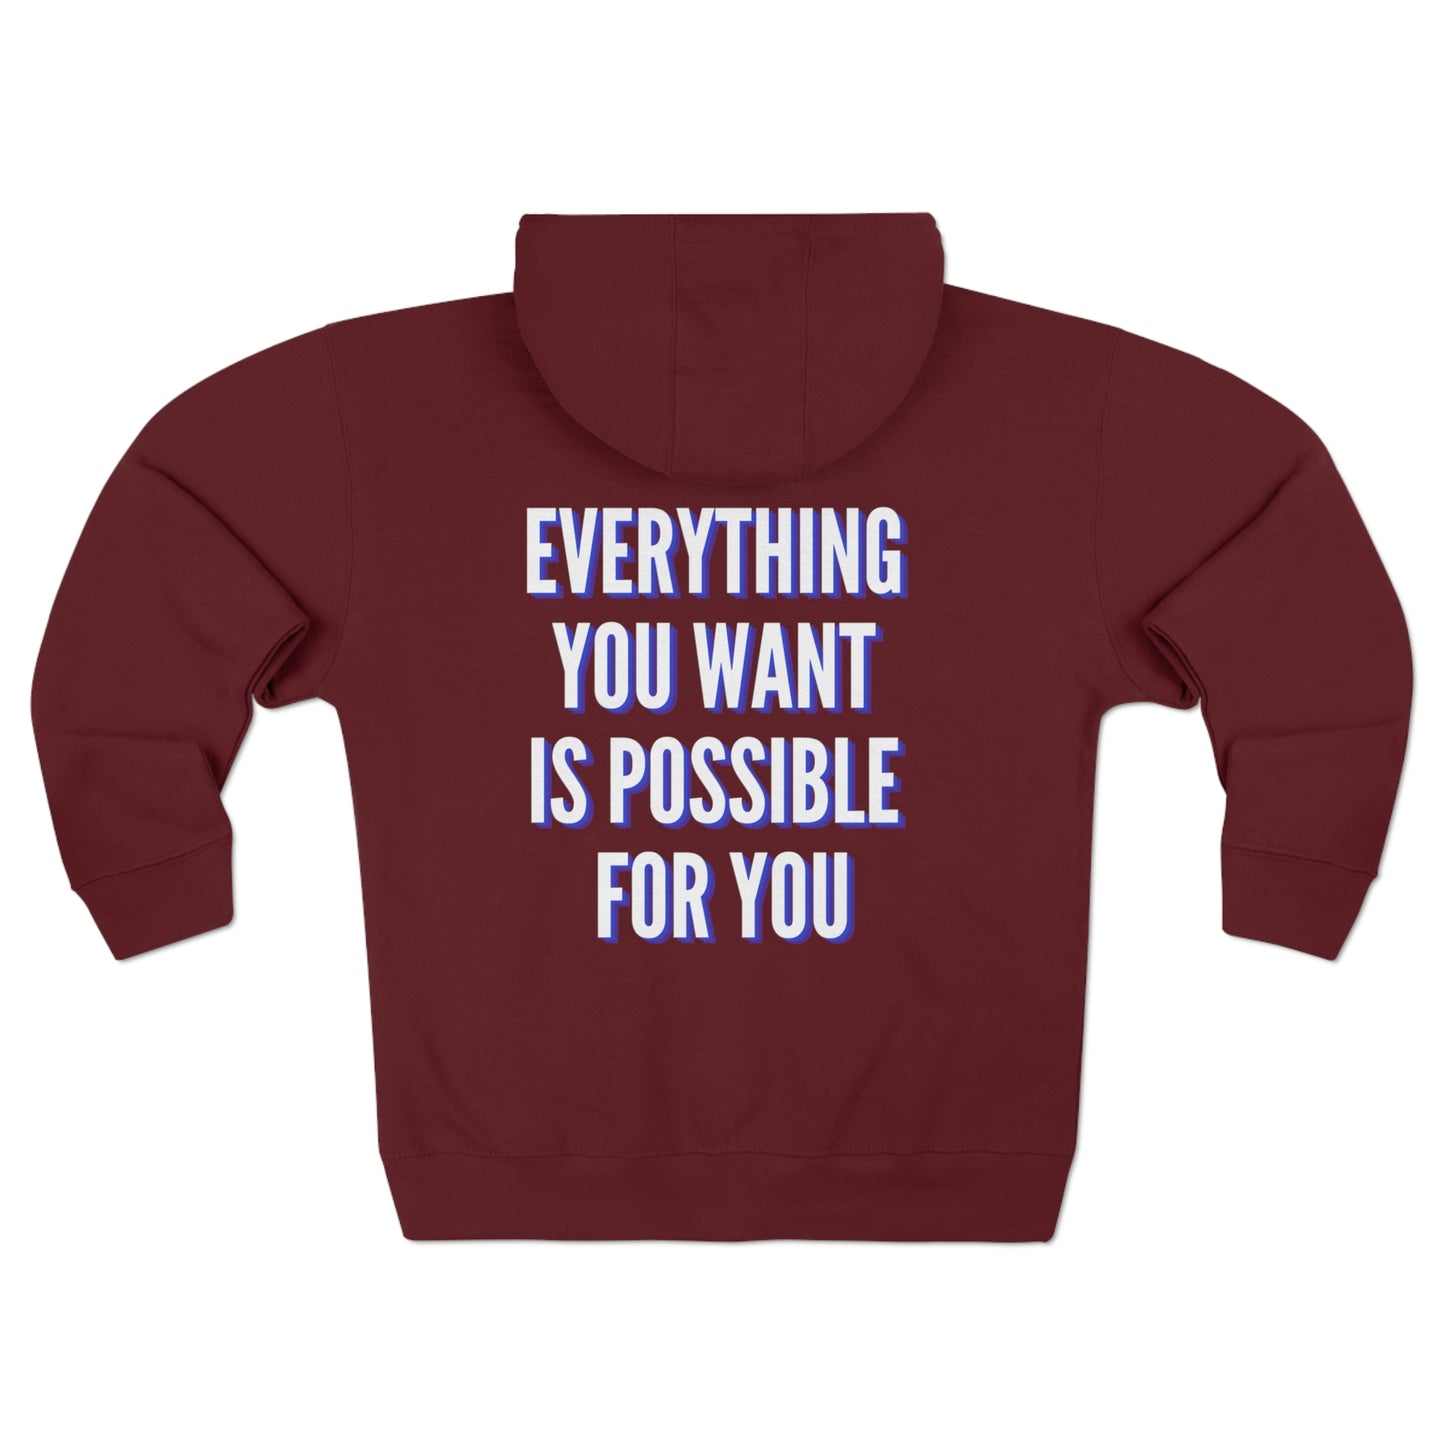 Everything You Want Is Possible For You - Full Zip Hoodie